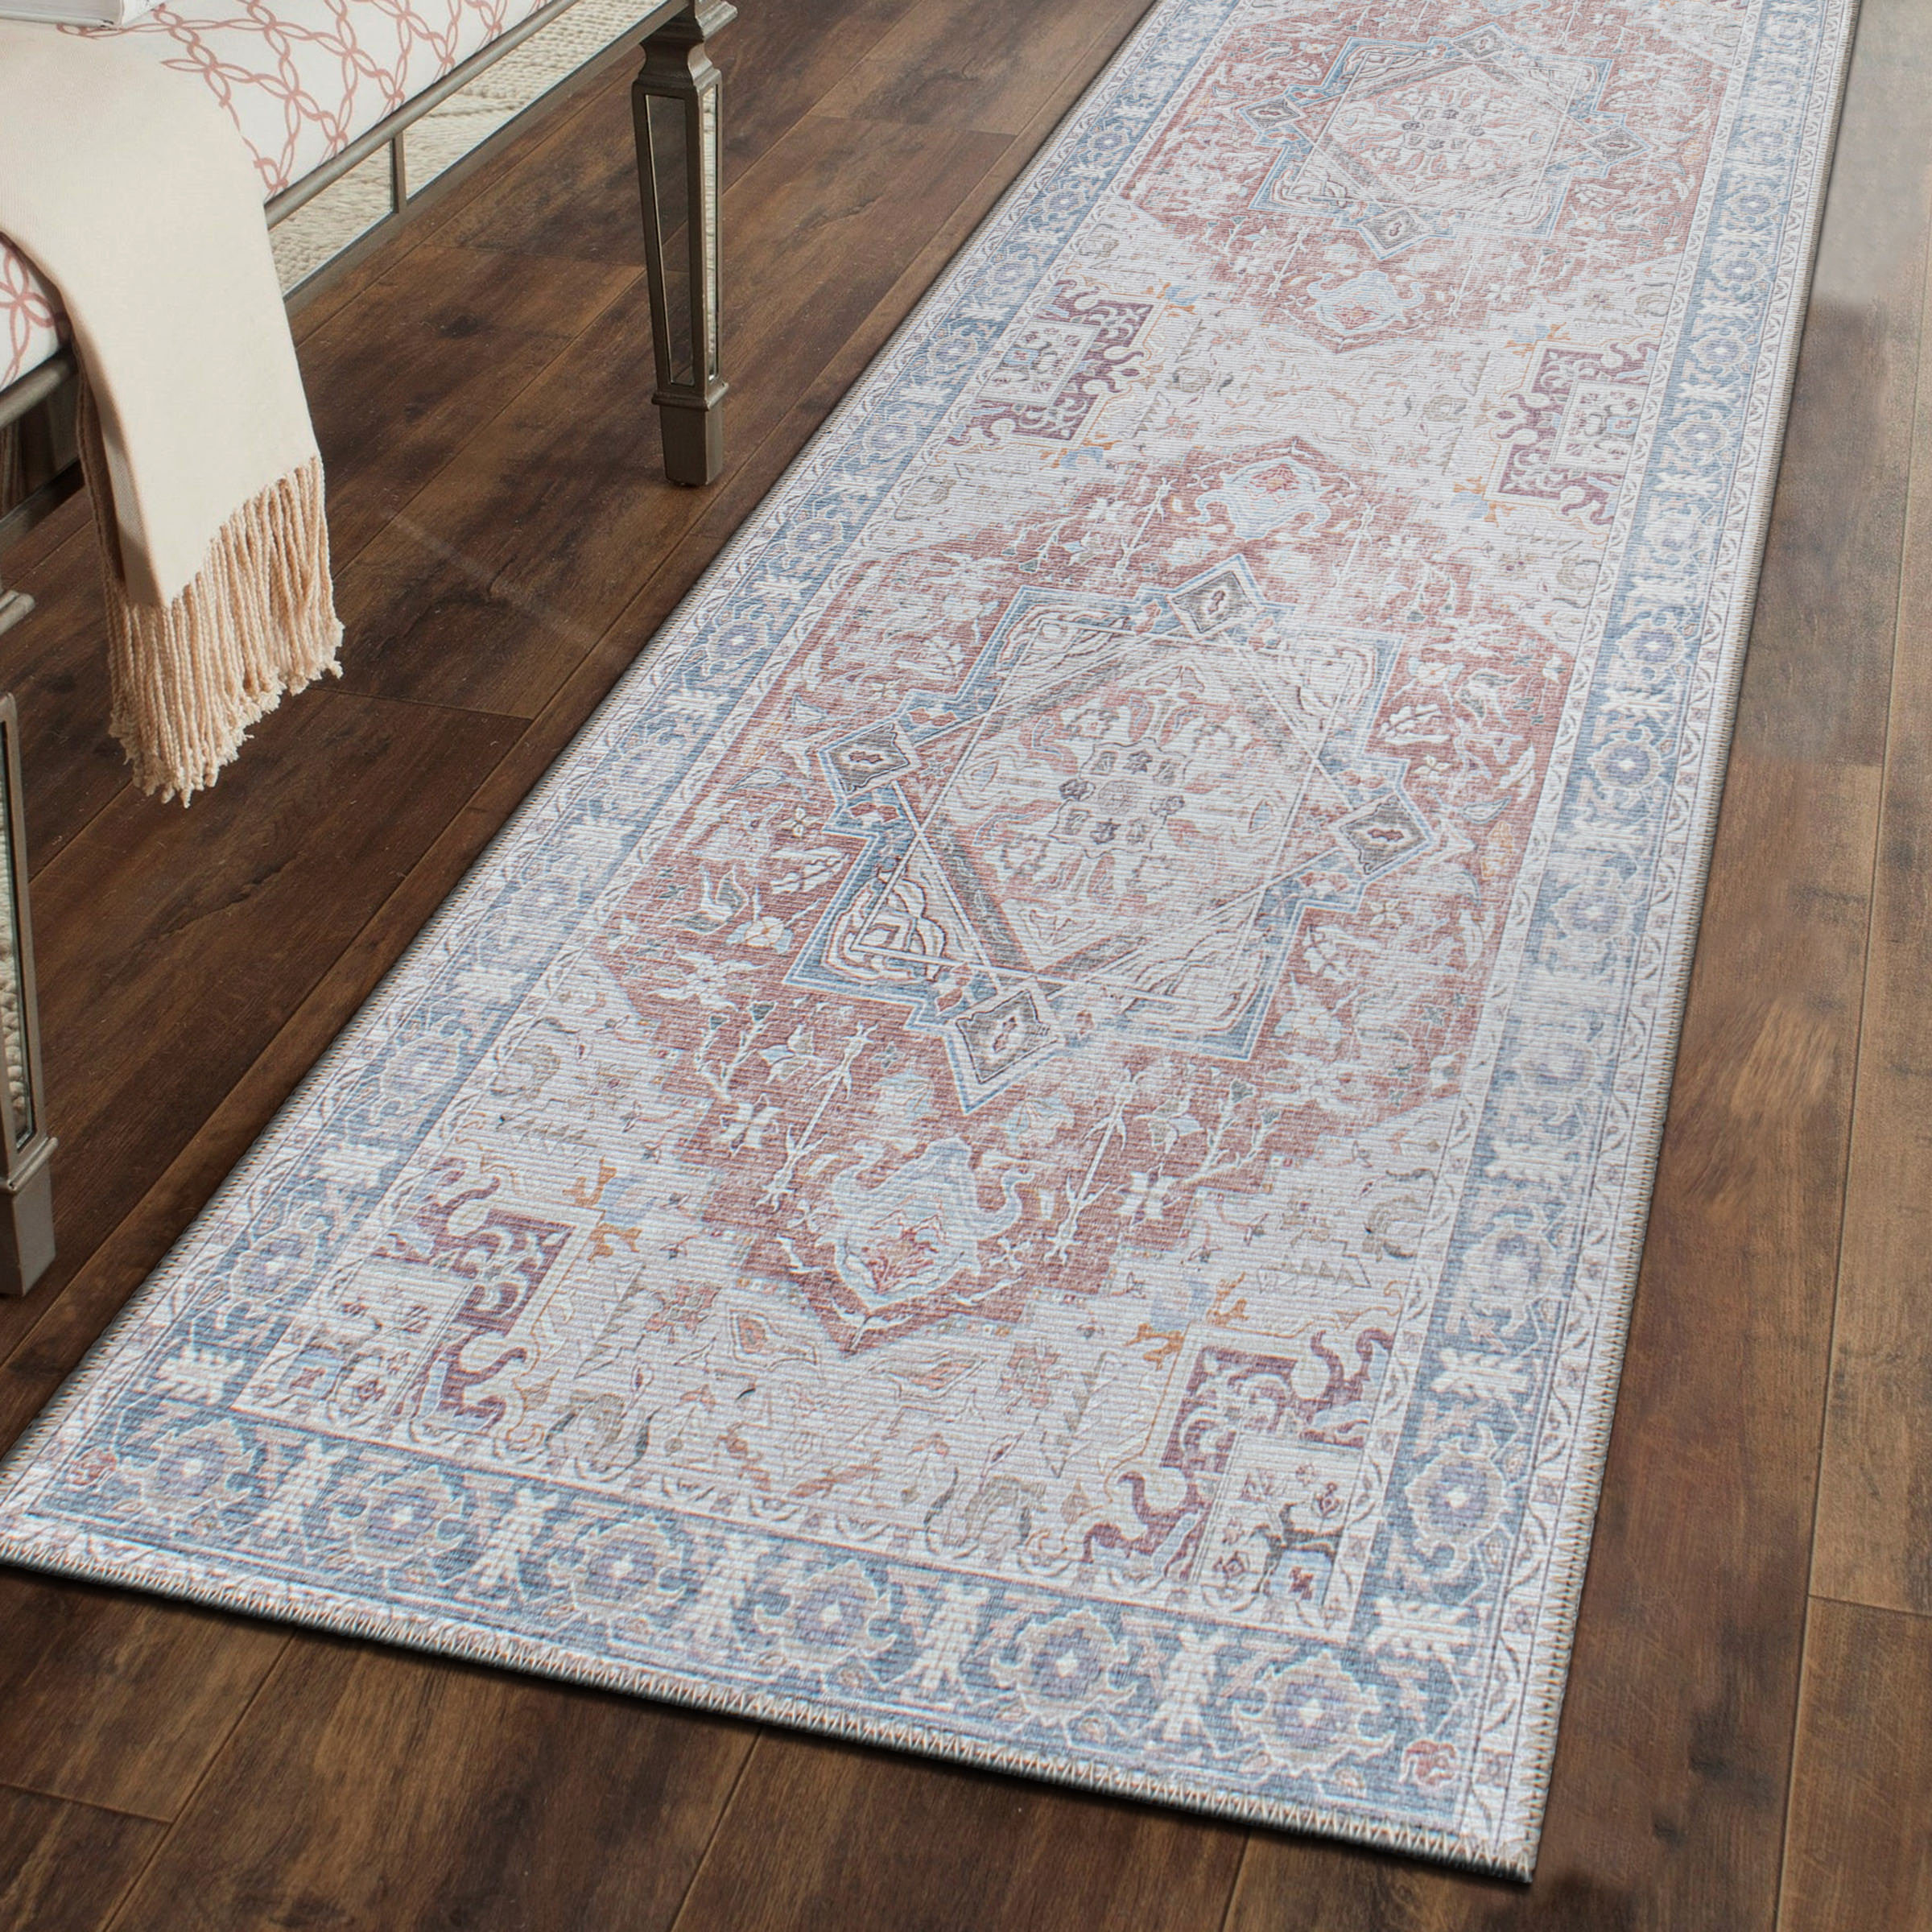 Tumble Washable Rugs Review - Read This Before Buying - Love Remodeled